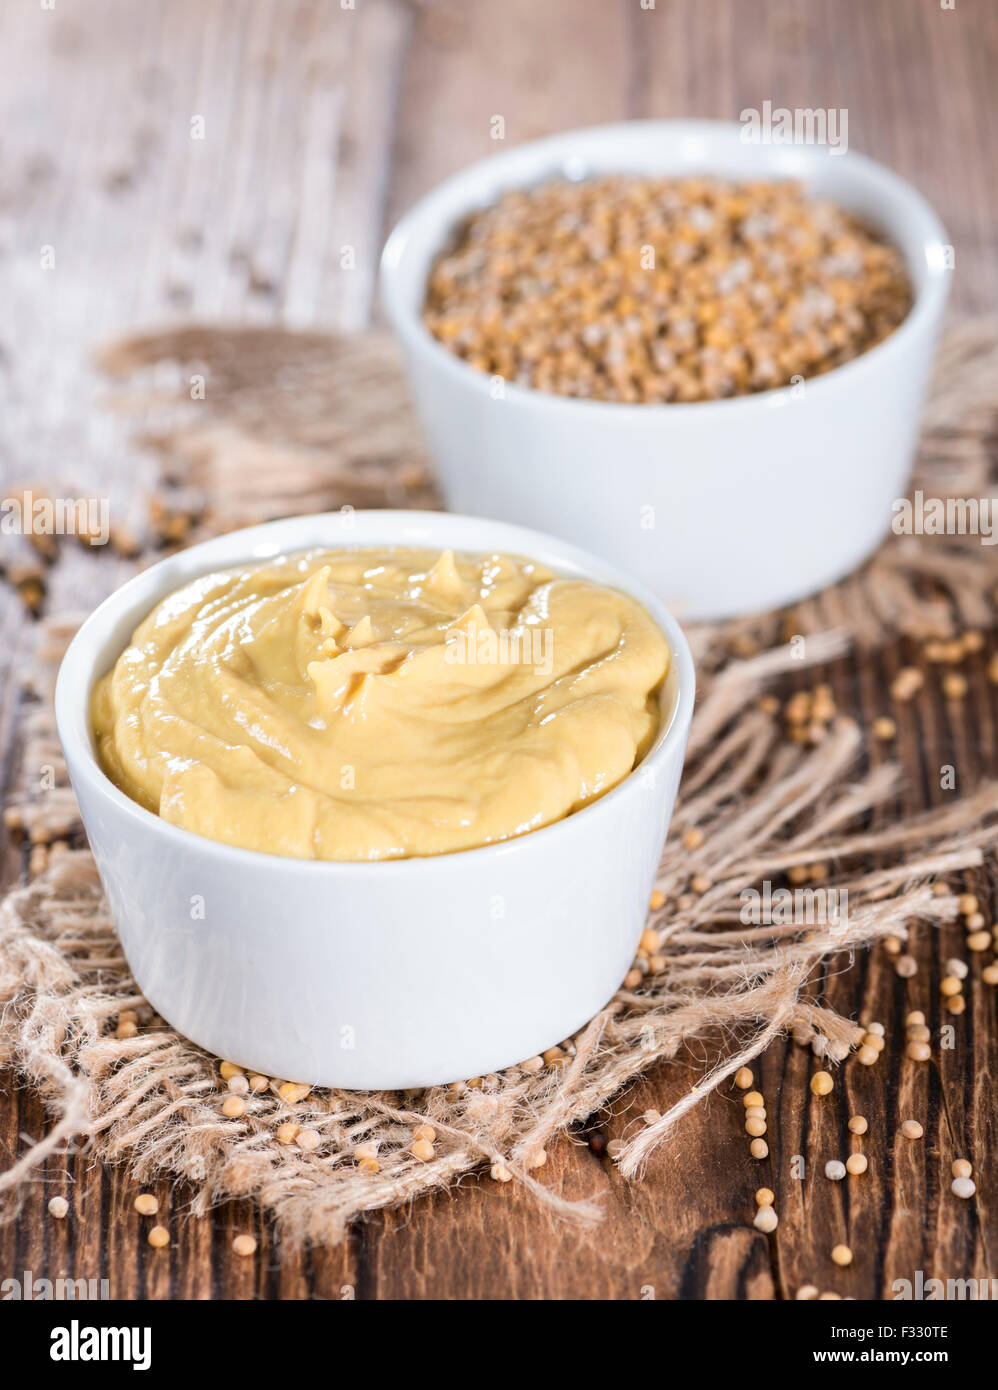 Portion of Mustard (on vintage wooden background) Stock Photo